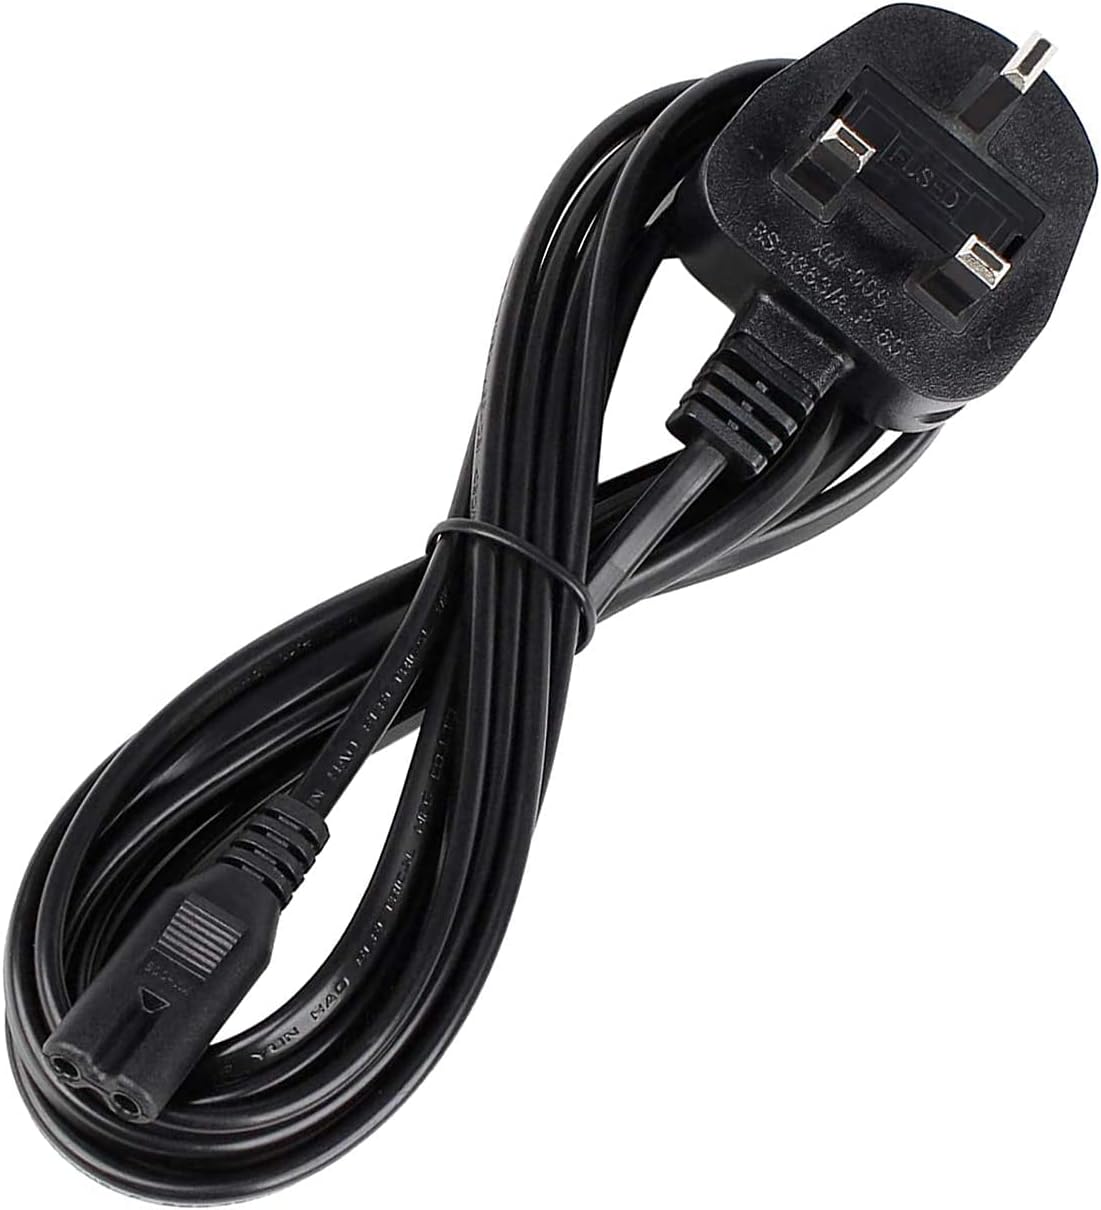 Power Cable for laptop adapter / charger 2 pin UK flat / Pro-Elec 1.5 m Figure of 8 Mains Cable